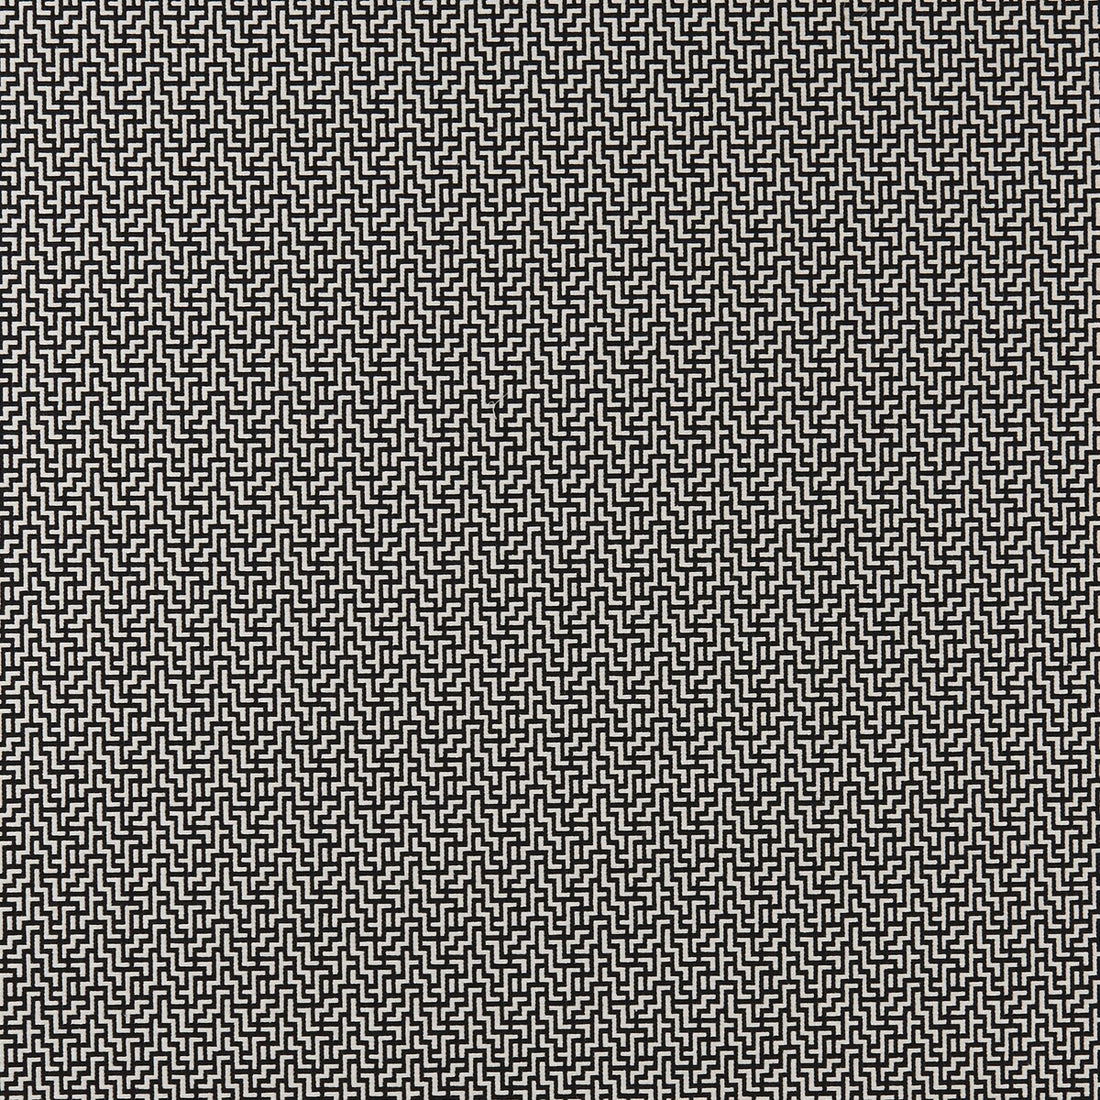 Bw1030 fabric in black/white color - pattern F0903/01.CAC.0 - by Clarke And Clarke in the Clarke &amp; Clarke Black + White collection